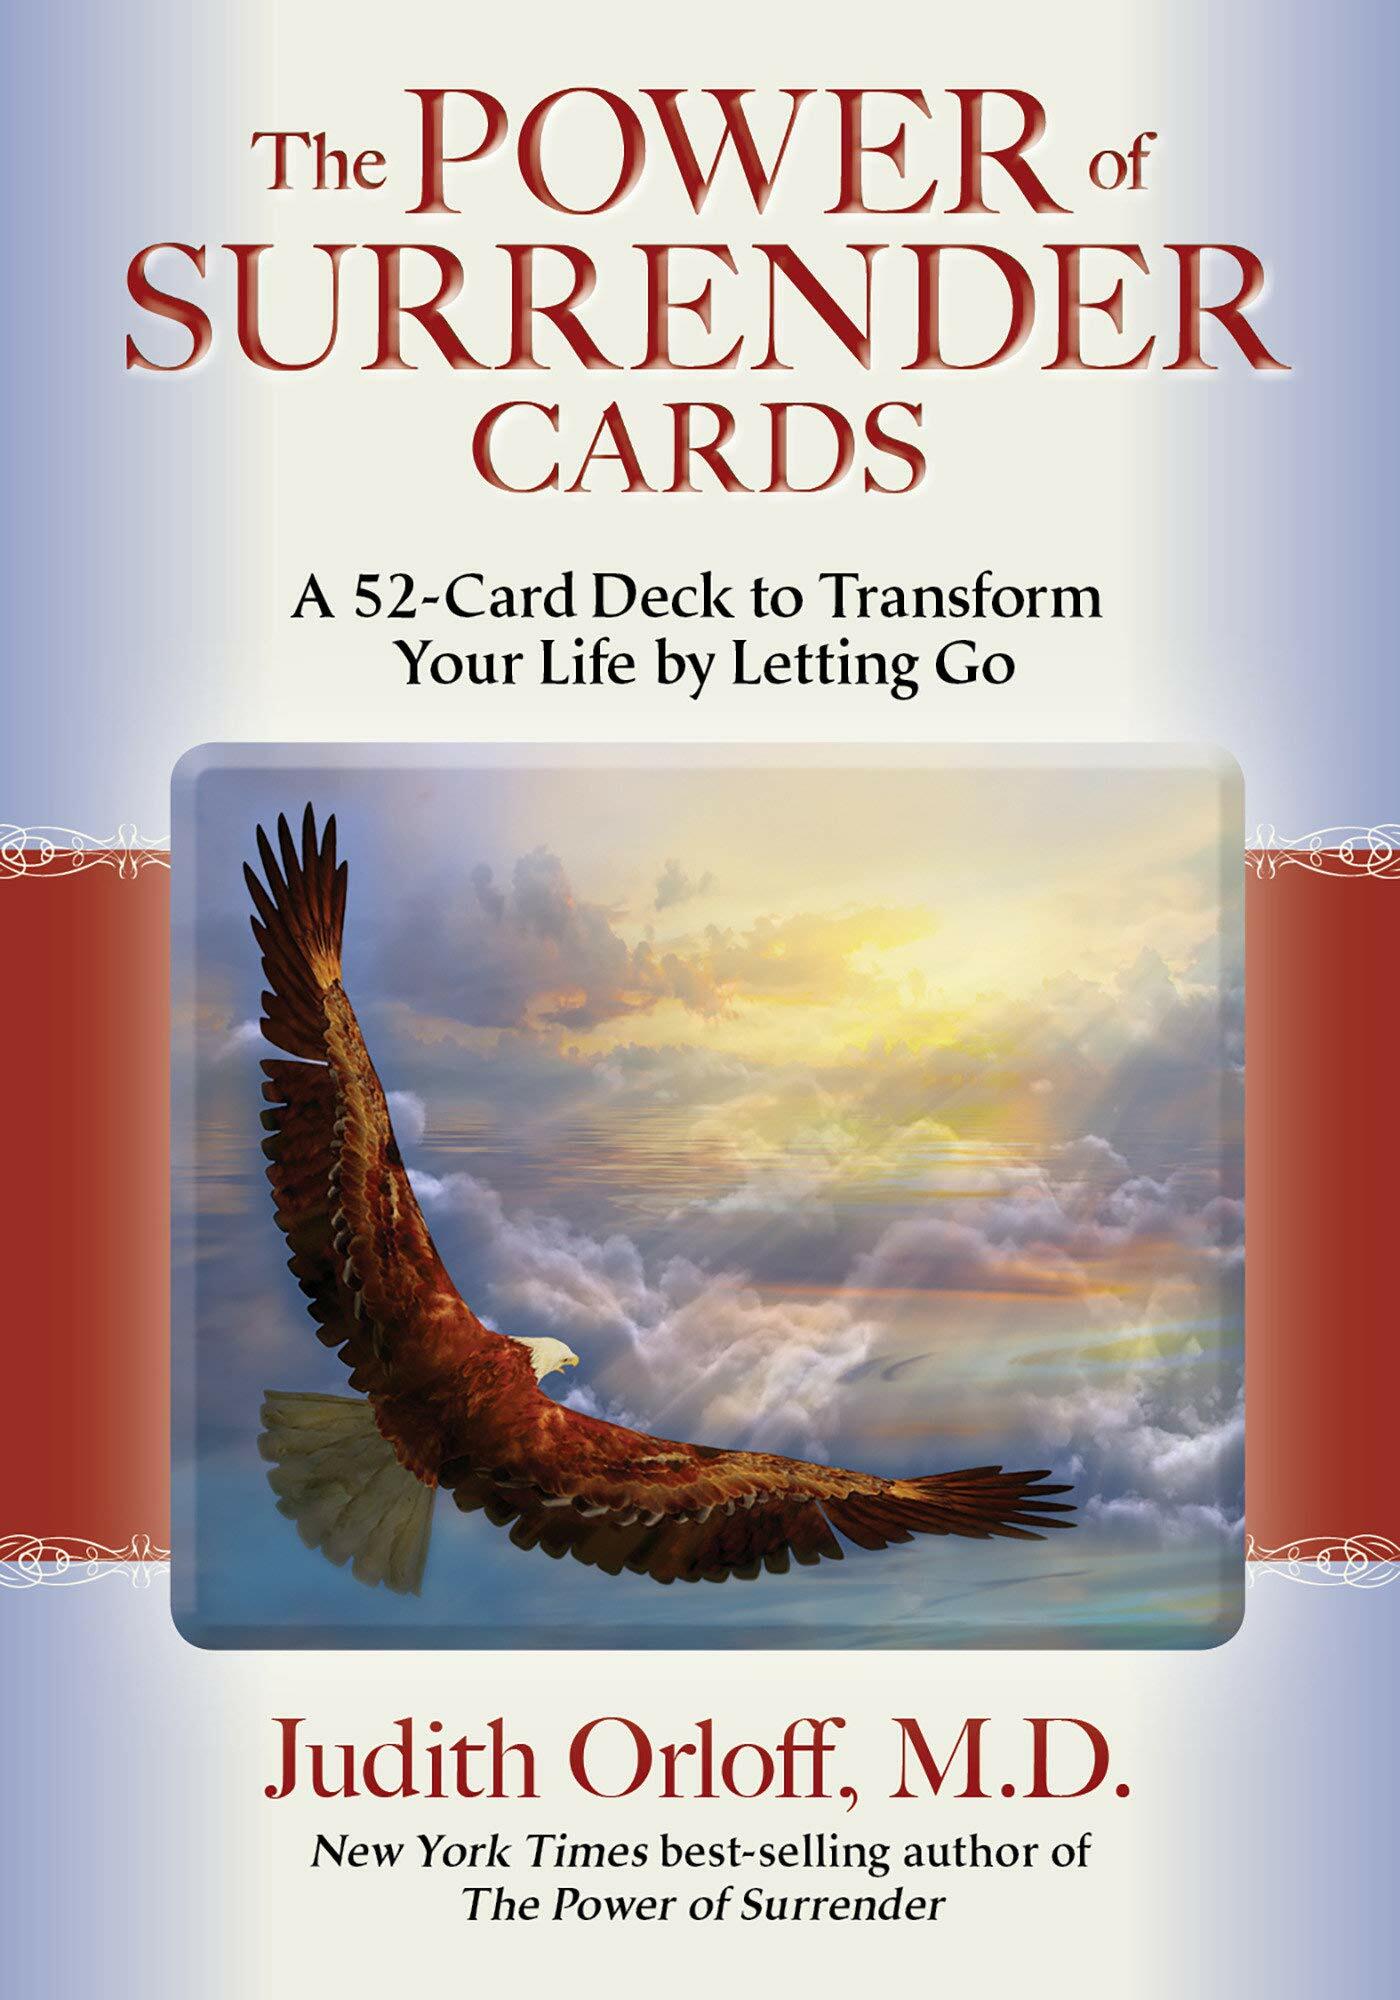 The Power of Surrender Cards: A 52-Card Deck to Transform Your Life by Letting Go (Other)